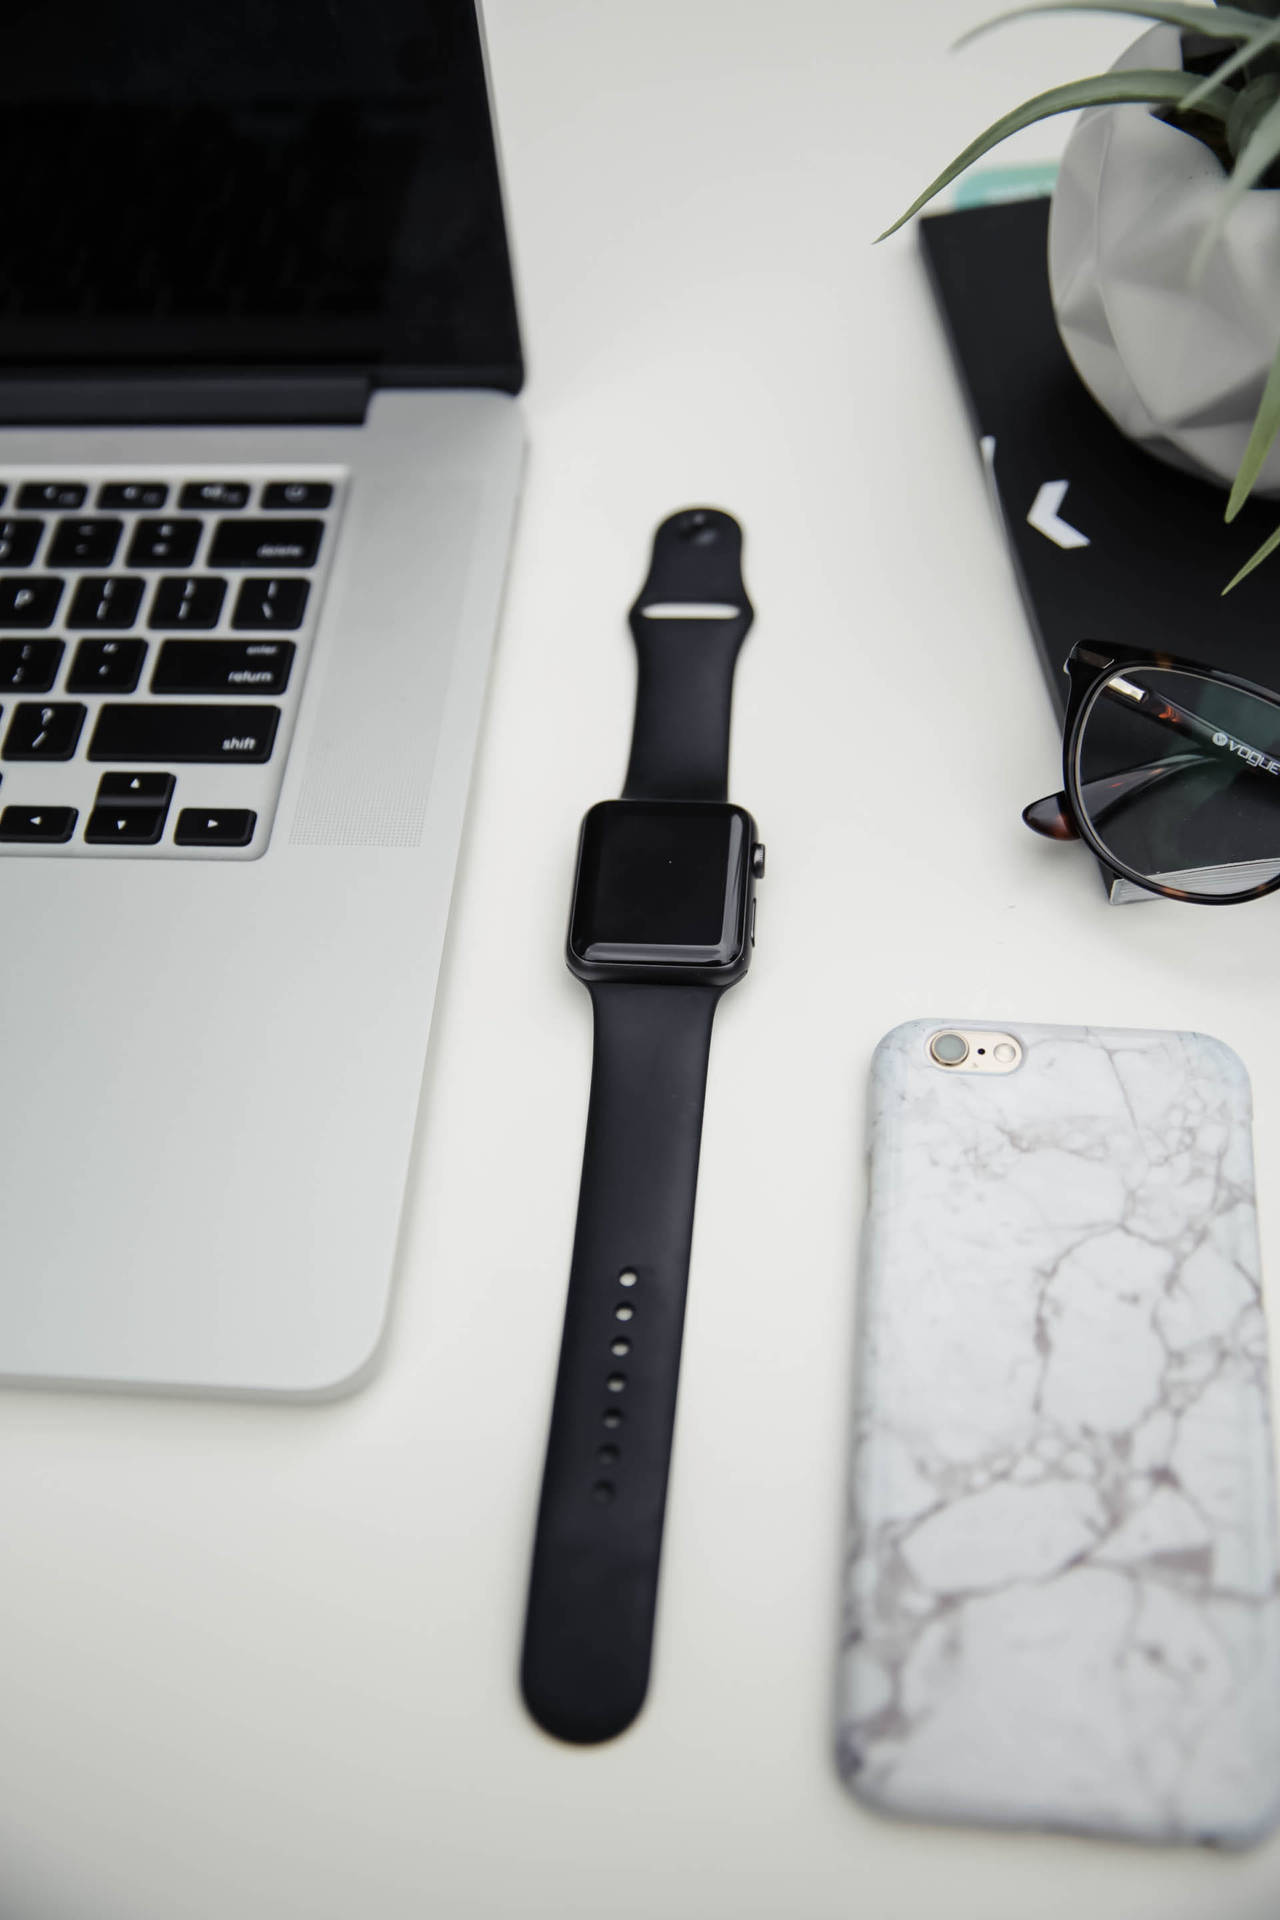 Iphone Desk With Smartwatch Wallpaper